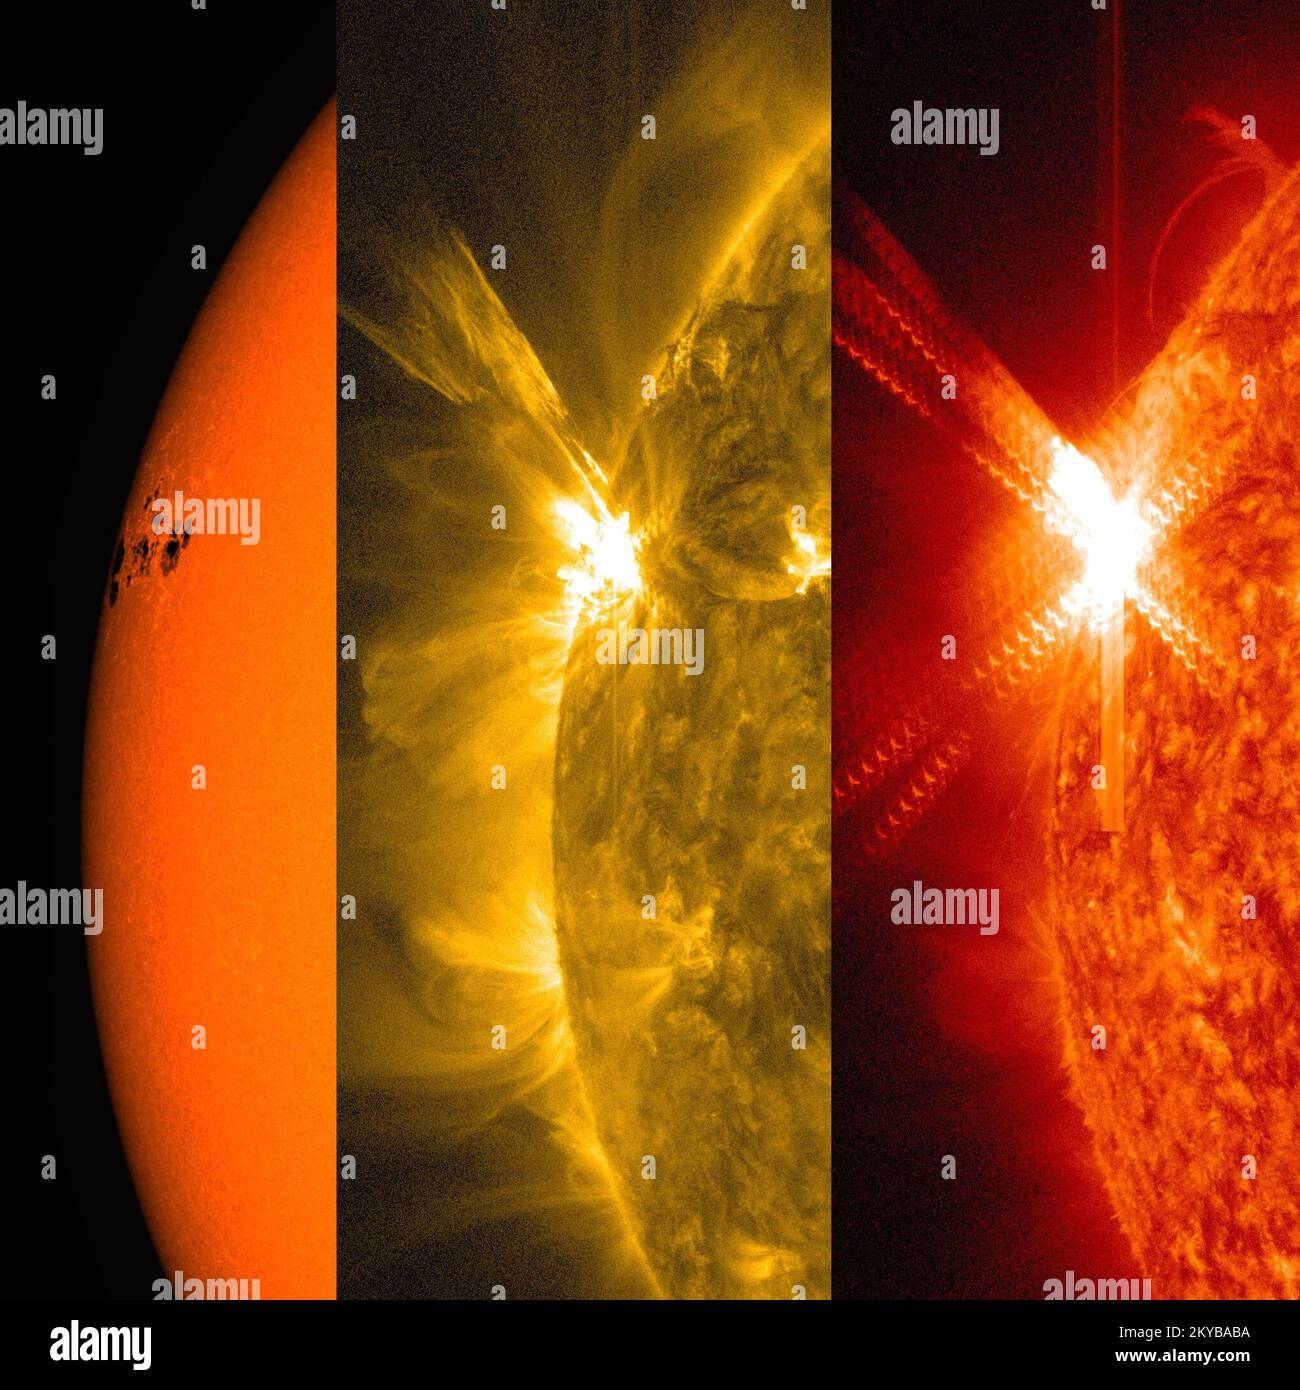 This is an image of a solar flare captured by NASA's Solar Dynamics Observatory. It shows a solar flare in three wavelengths of light: visible, 171 angstroms, and 304 angstroms (an angstrom is roughly the diameter of an atom and it's the measurement we use to define the size of light waves). Each wavelength shows a different temperature of material. Image courtesy of NASA... Photographs Relating to Disasters and Emergency Management Programs, Activities, and Officials Stock Photo